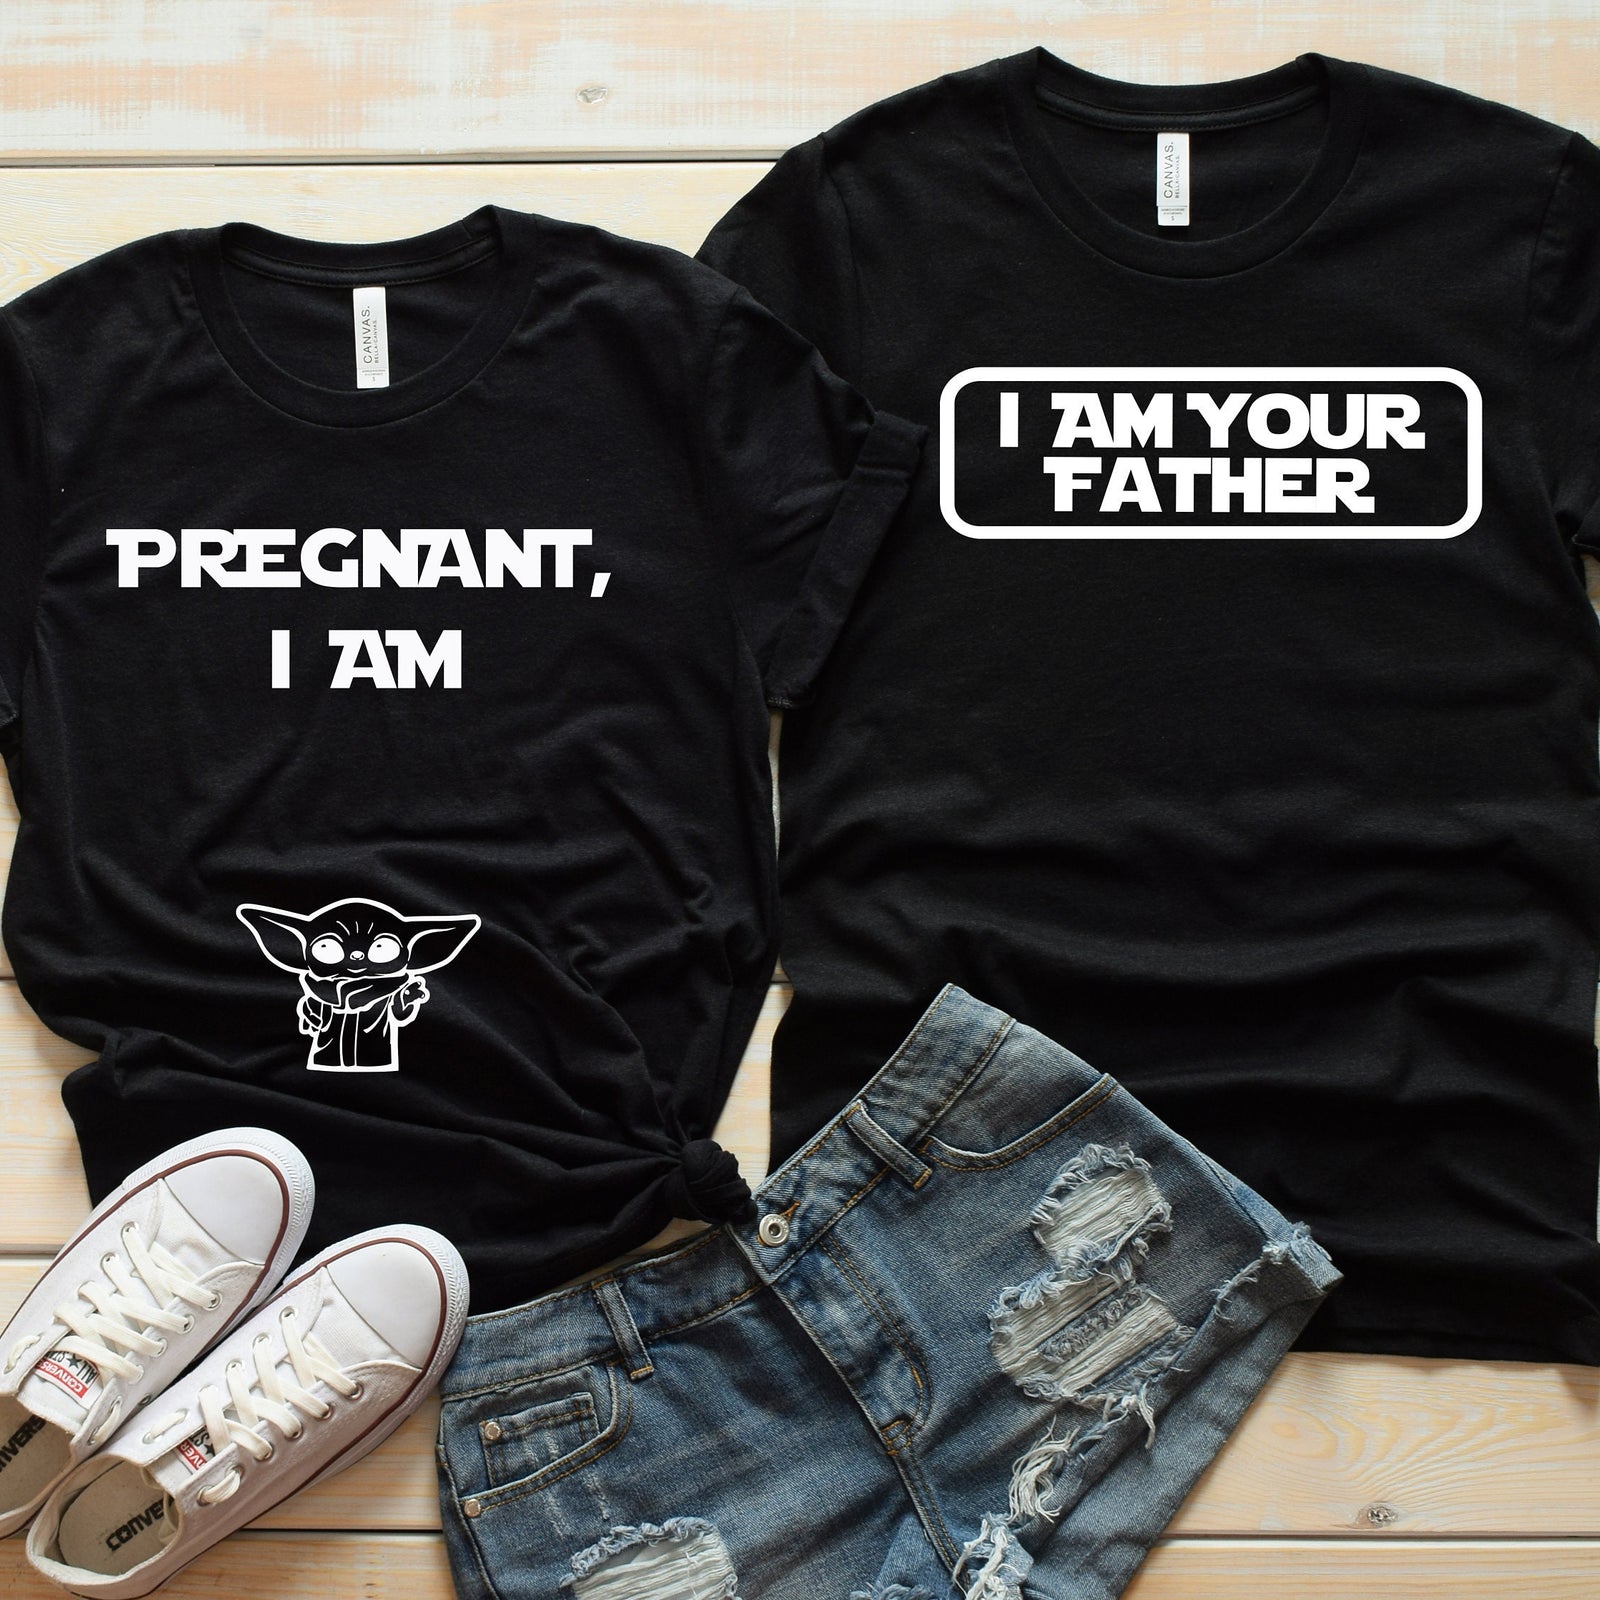 Pregnant I am - I Am Your Father - Disney Star wars Couples Shirt- Pregnancy Announcement - Baby Reveal